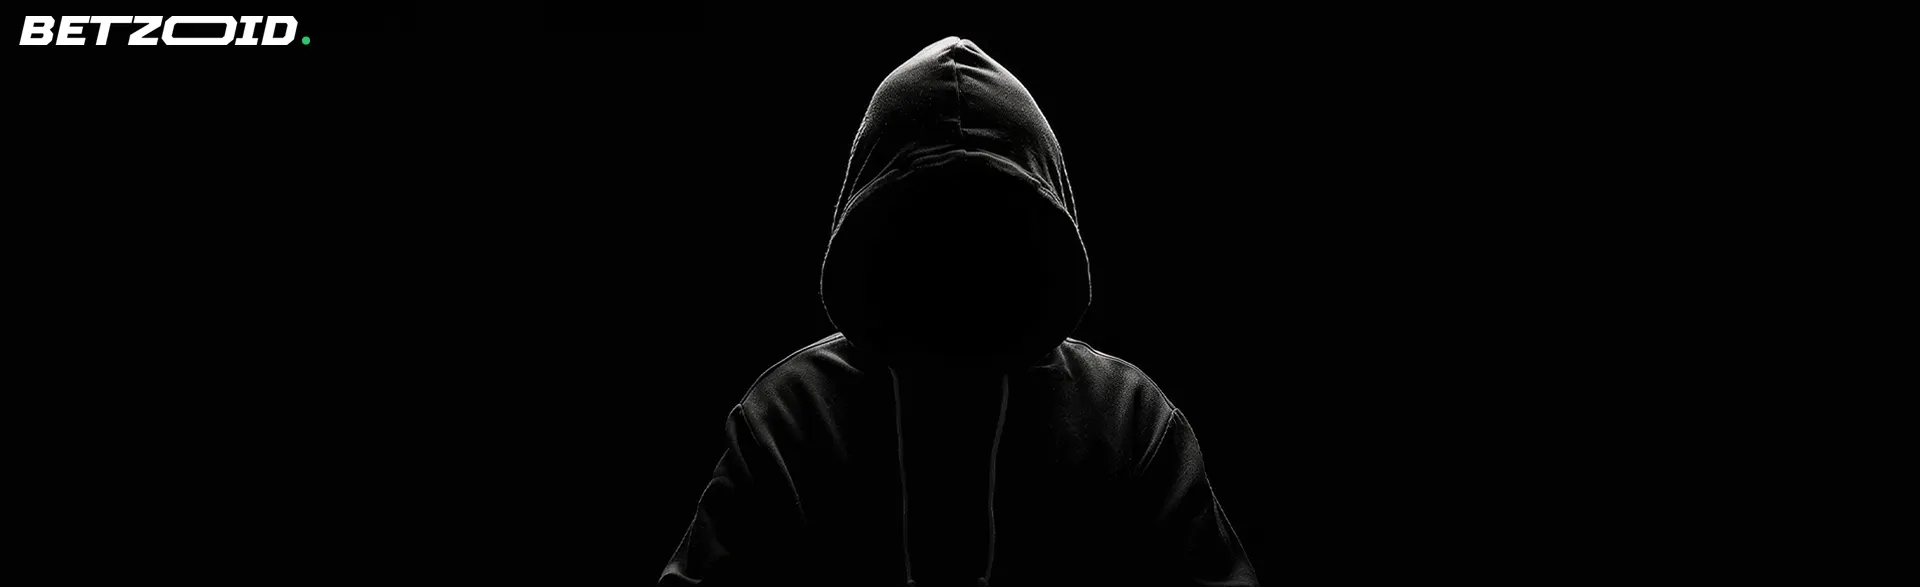 Mysterious figure in a black hoodie, symbolizing the privacy and anonymity offered by sports betting sites in Canada.